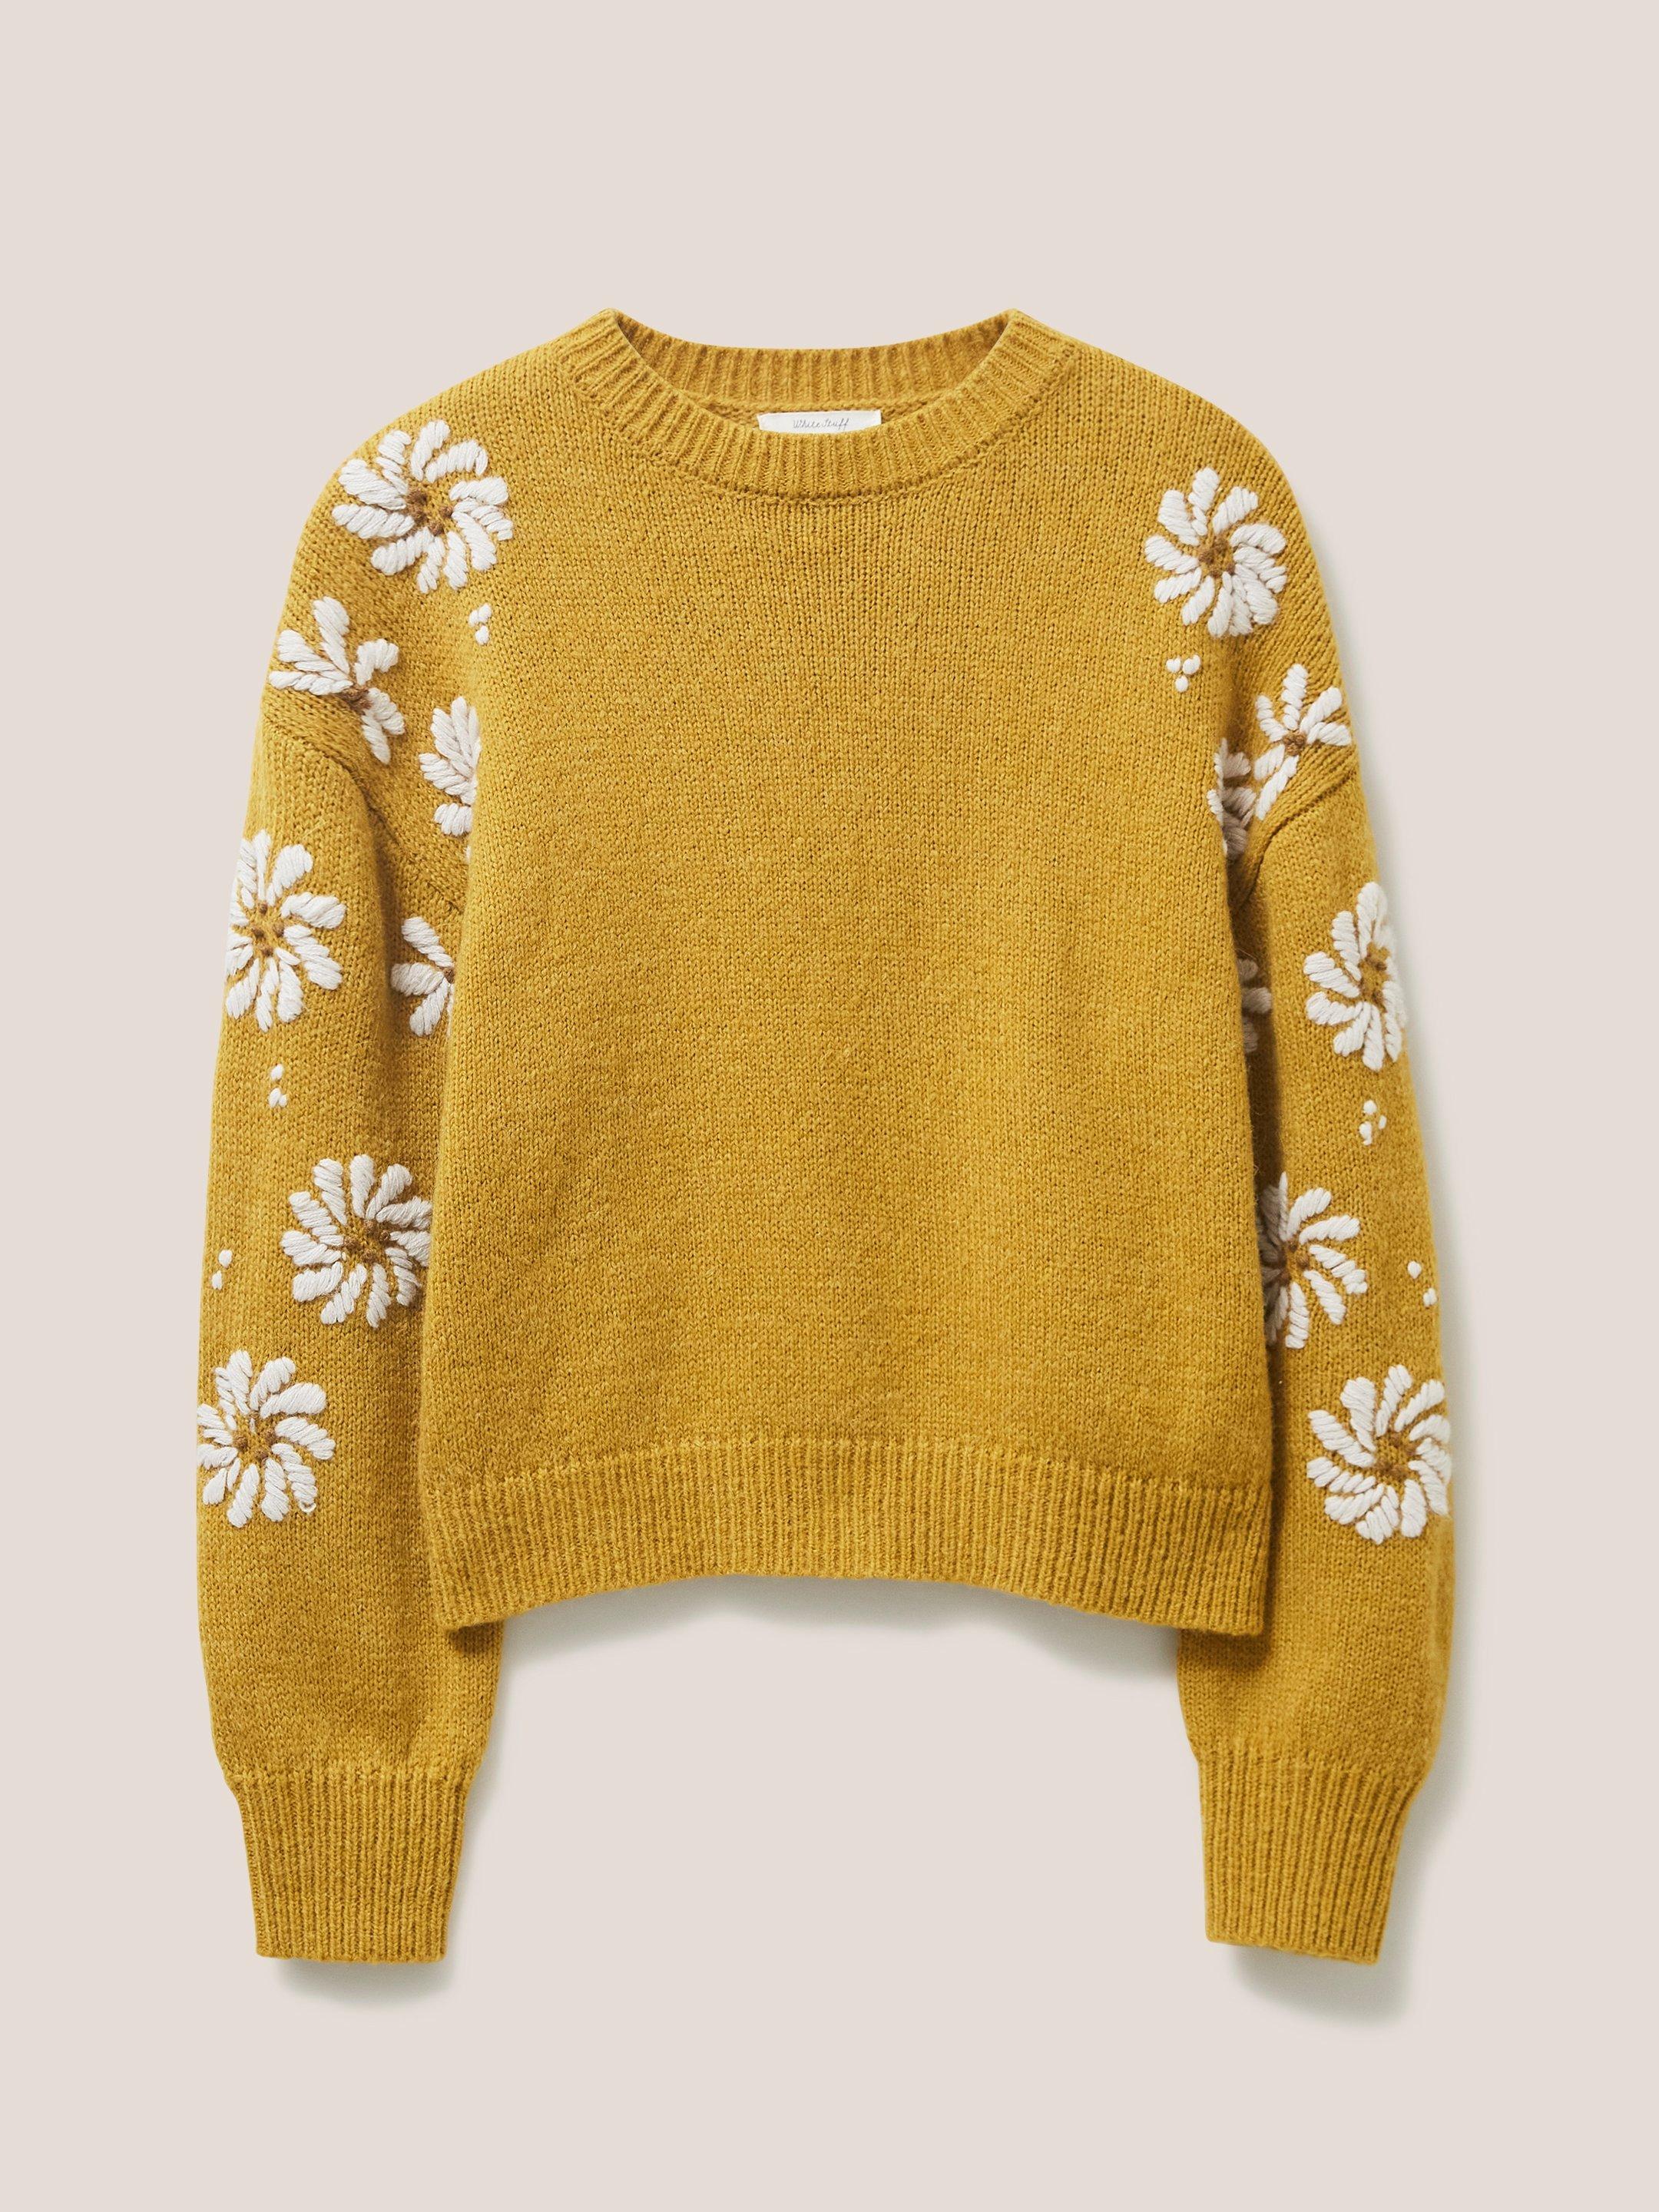 Carousel Embroidered Jumper in DP YELLOW - FLAT FRONT